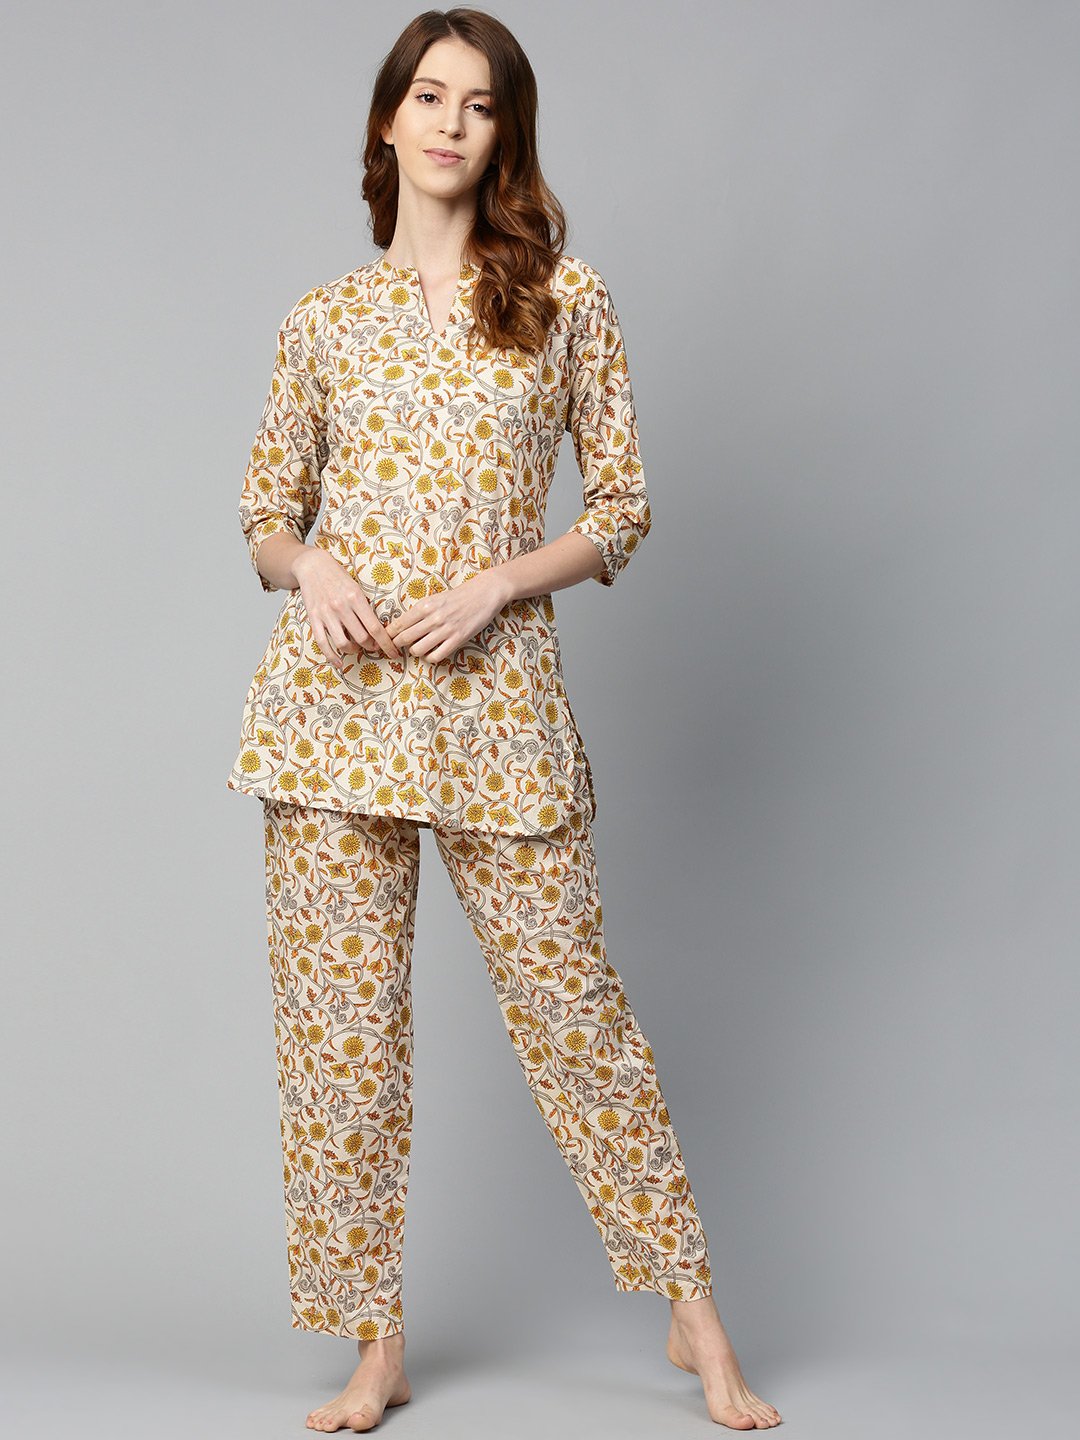 Women's Cream And Multi Floral Prnt Top And Pant Set - Nayo Clothing